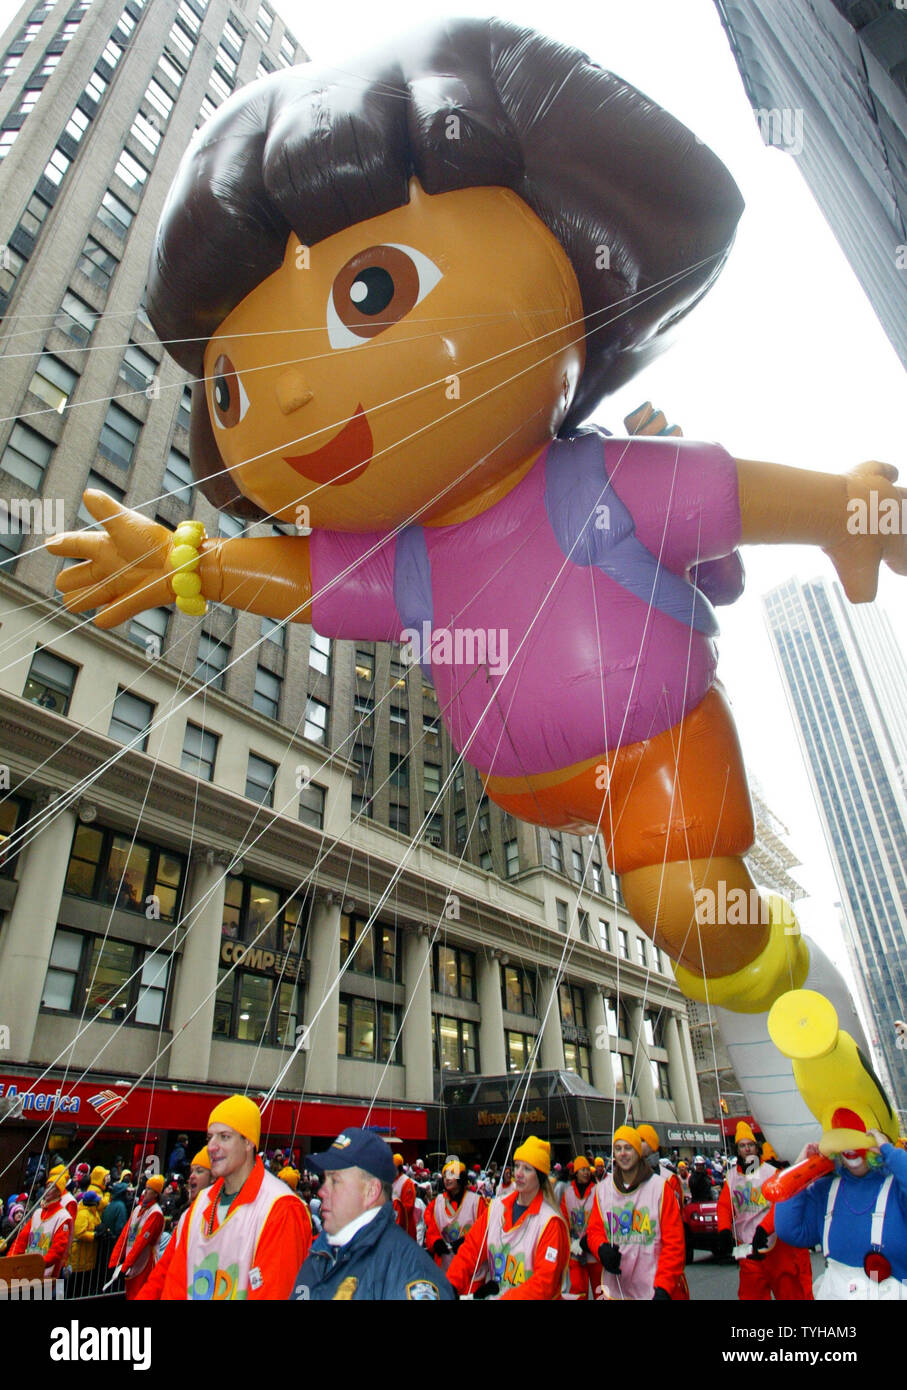 The Dora the Explorer giant helium balloon makes it's debut as it is guided down Broadway during the 79th Macy's Thanksgivings Day parade on November 24, 2005 in New York City. Dora, (UPI Photo/Monika Graff) Stock Photo